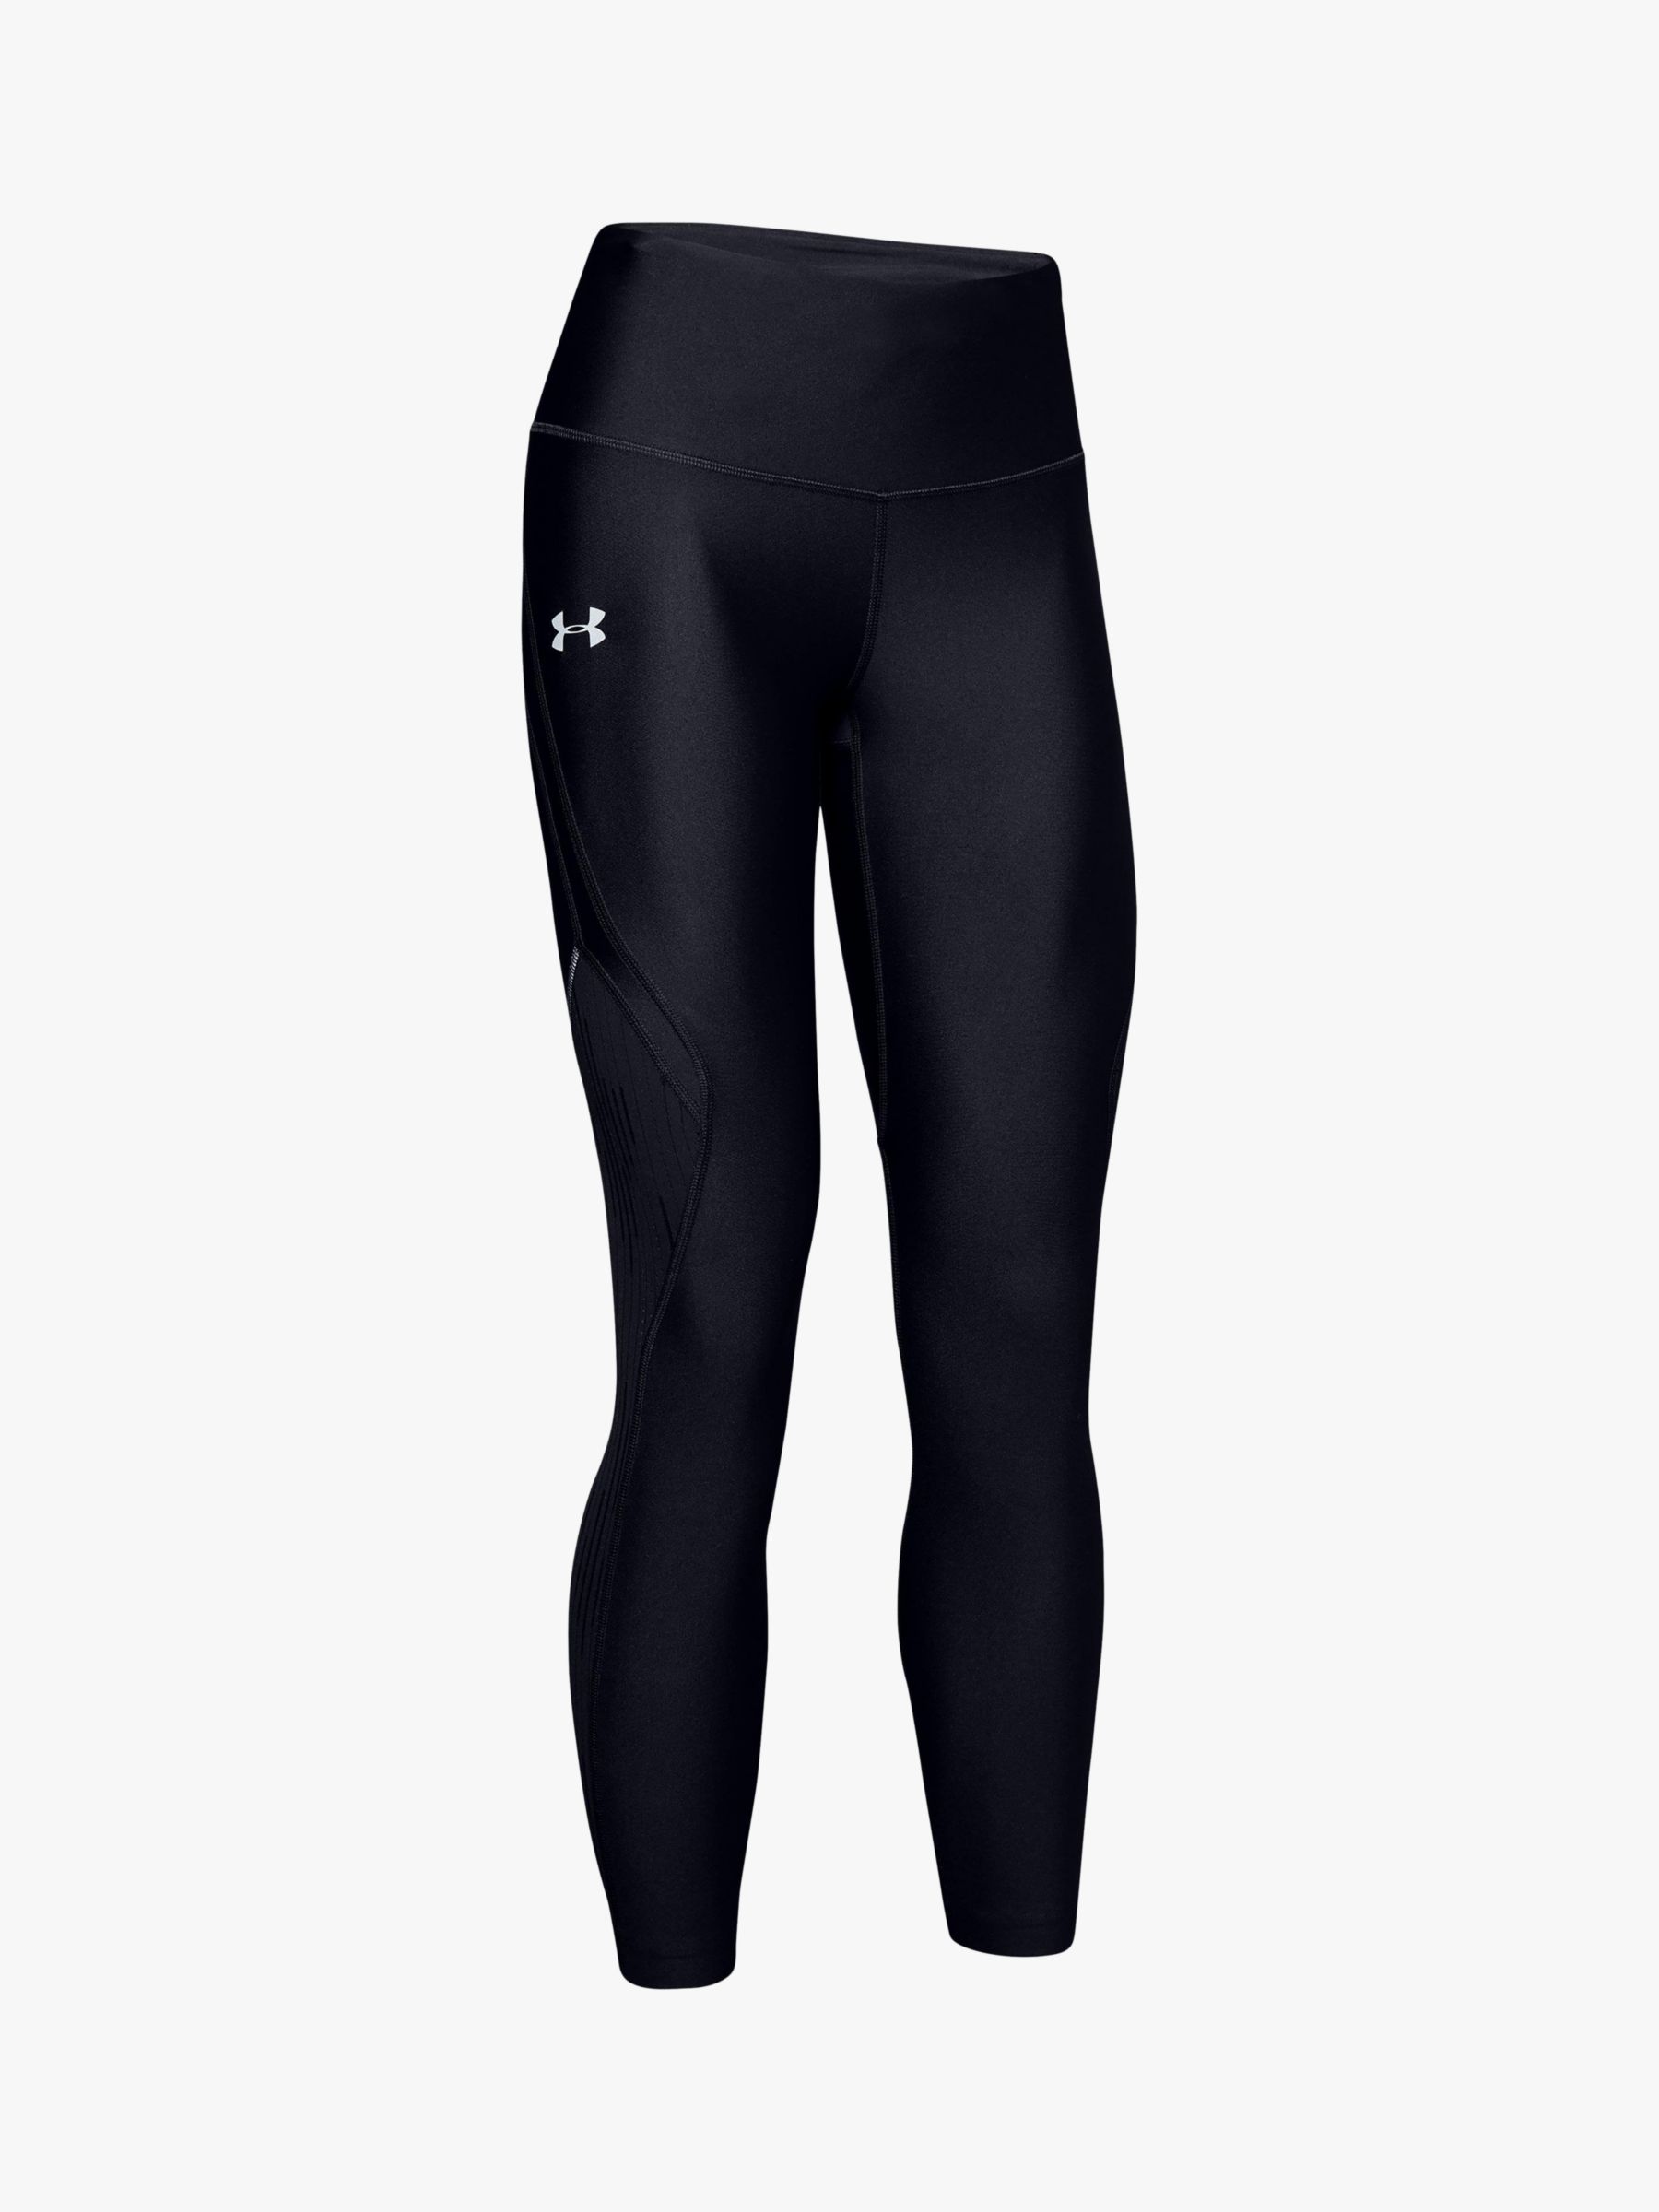 Under Armour Fly Fast Glare Raised Thread Cropped Running Tights, Black